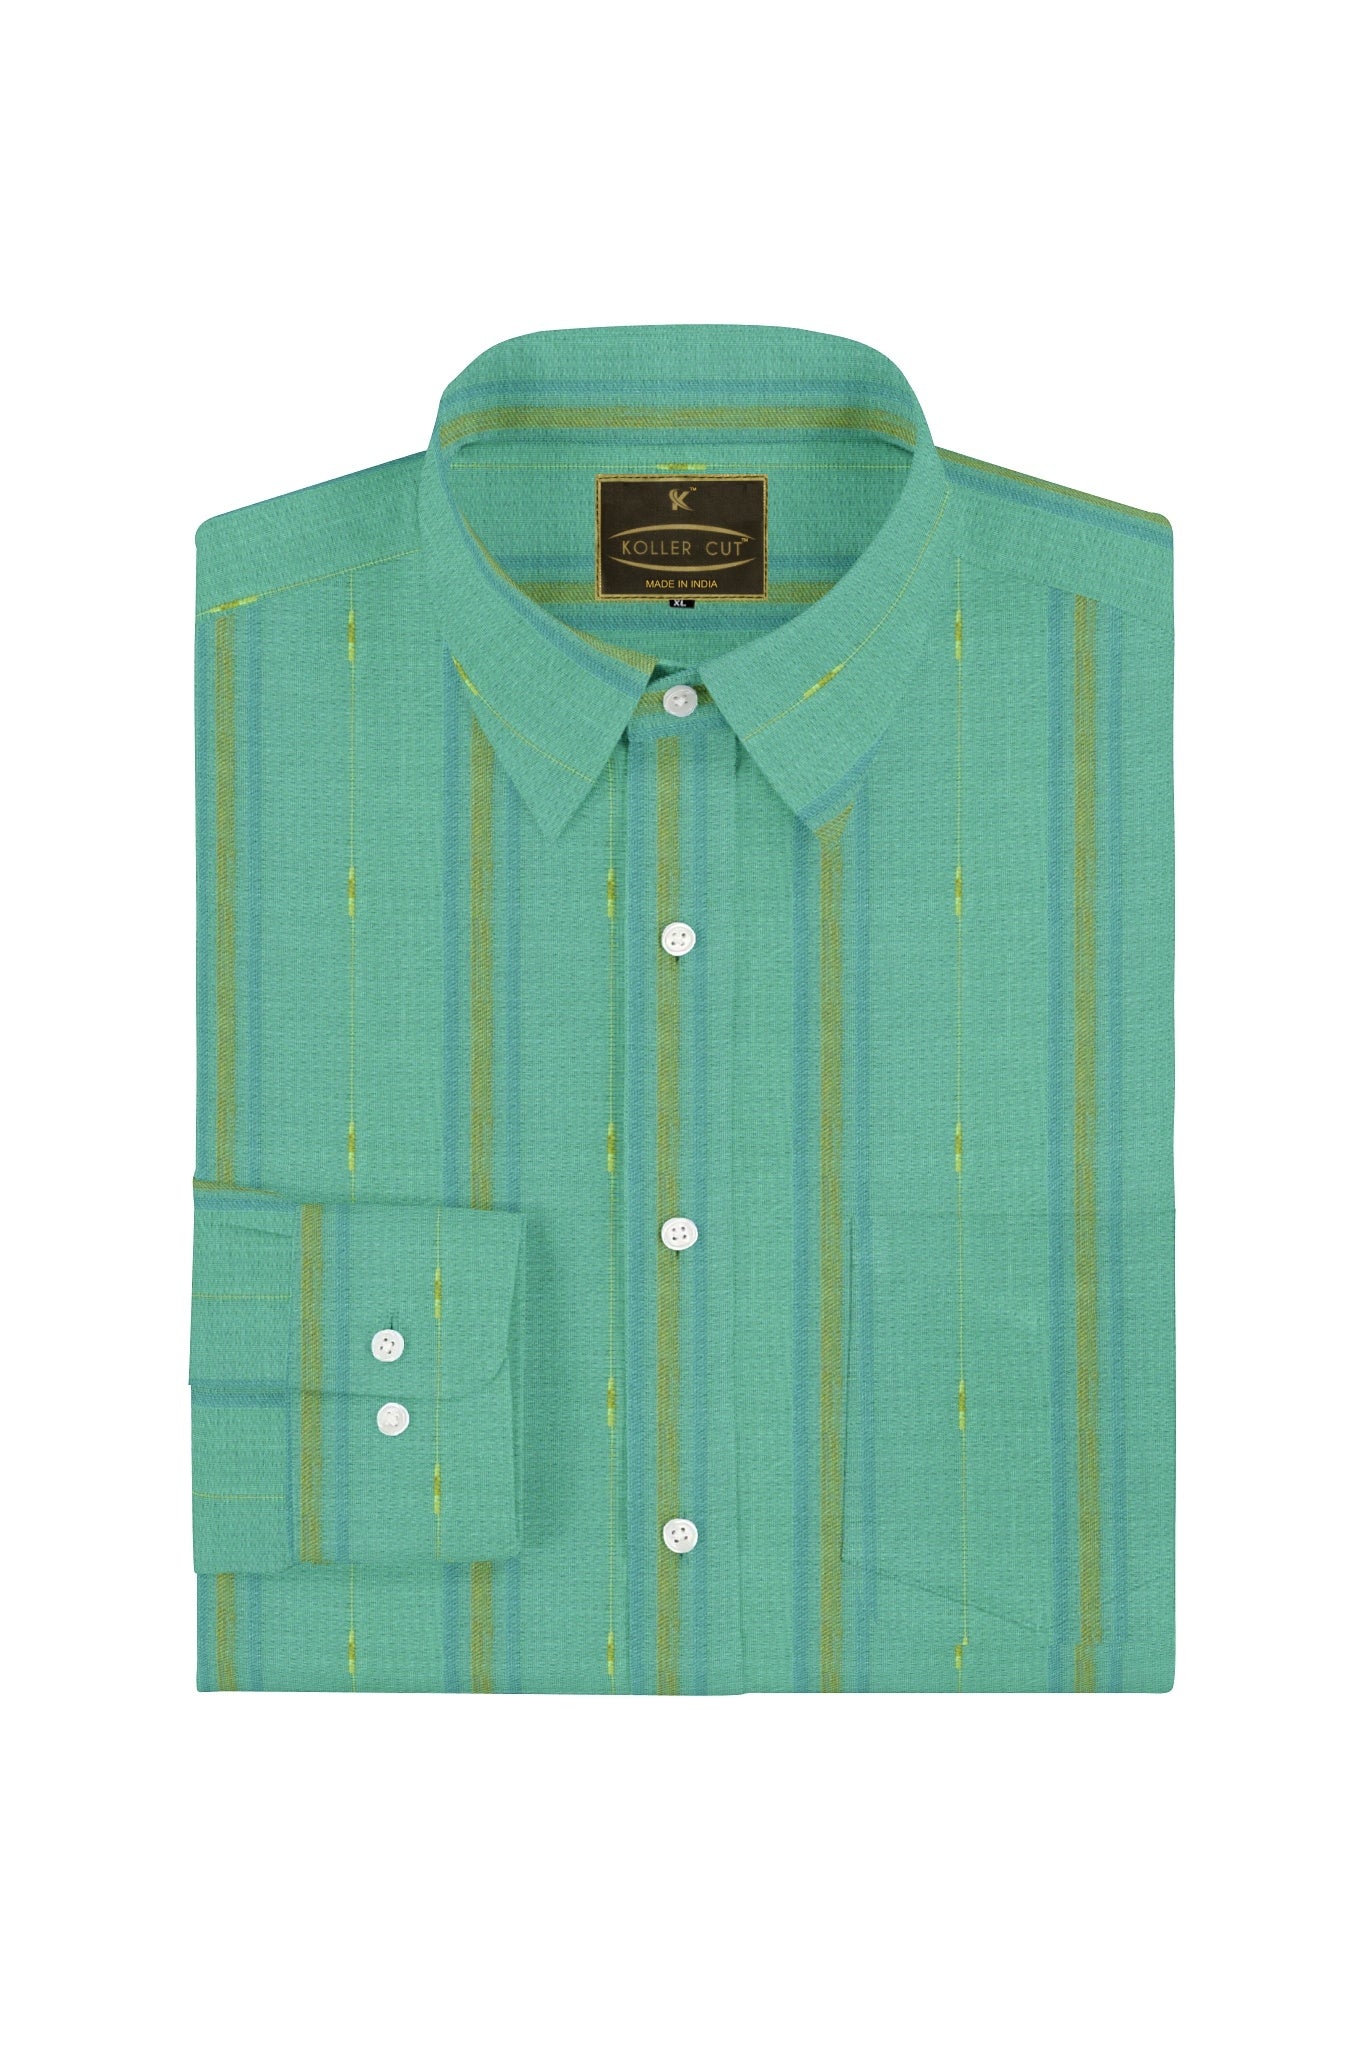 Dark Turquoise with Teal blue and Golden Wide Stripes Cotton Linen Shirt